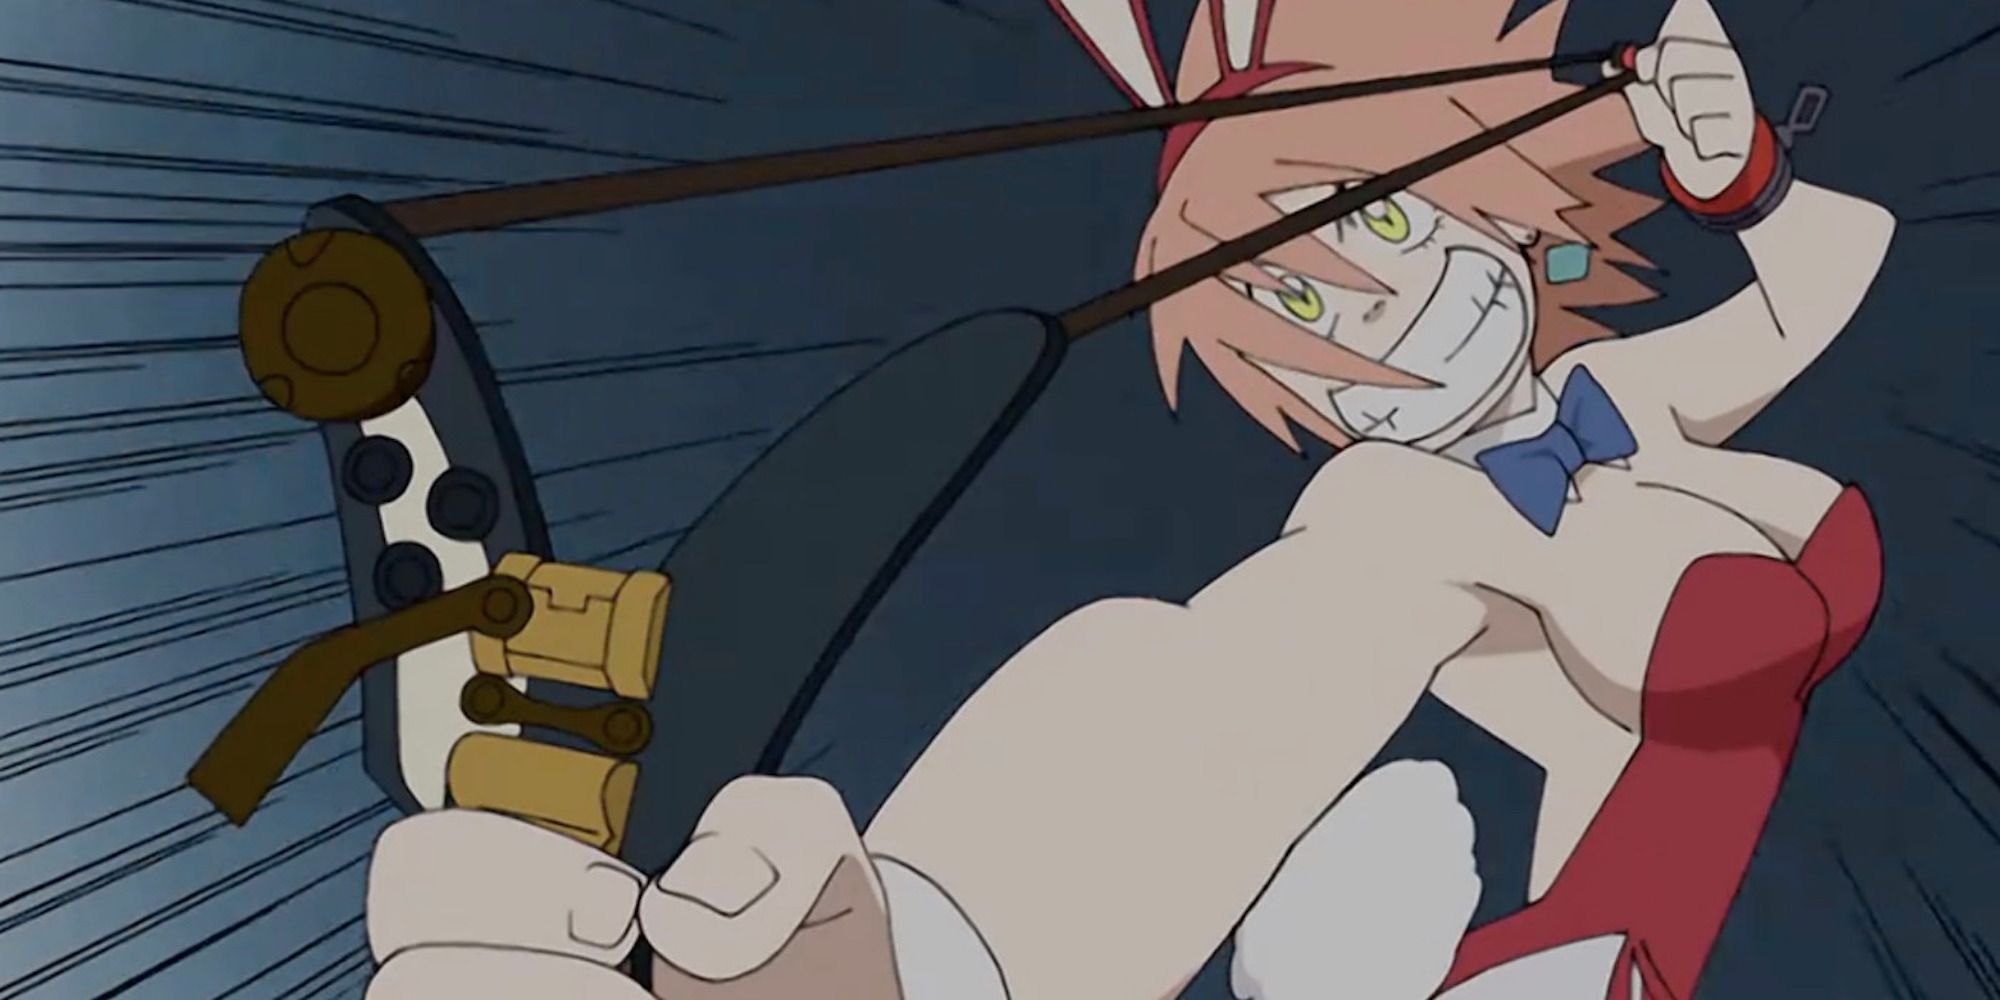 Fooly Cooly Out of Context on Twitter | Flcl, Anime images, Anime